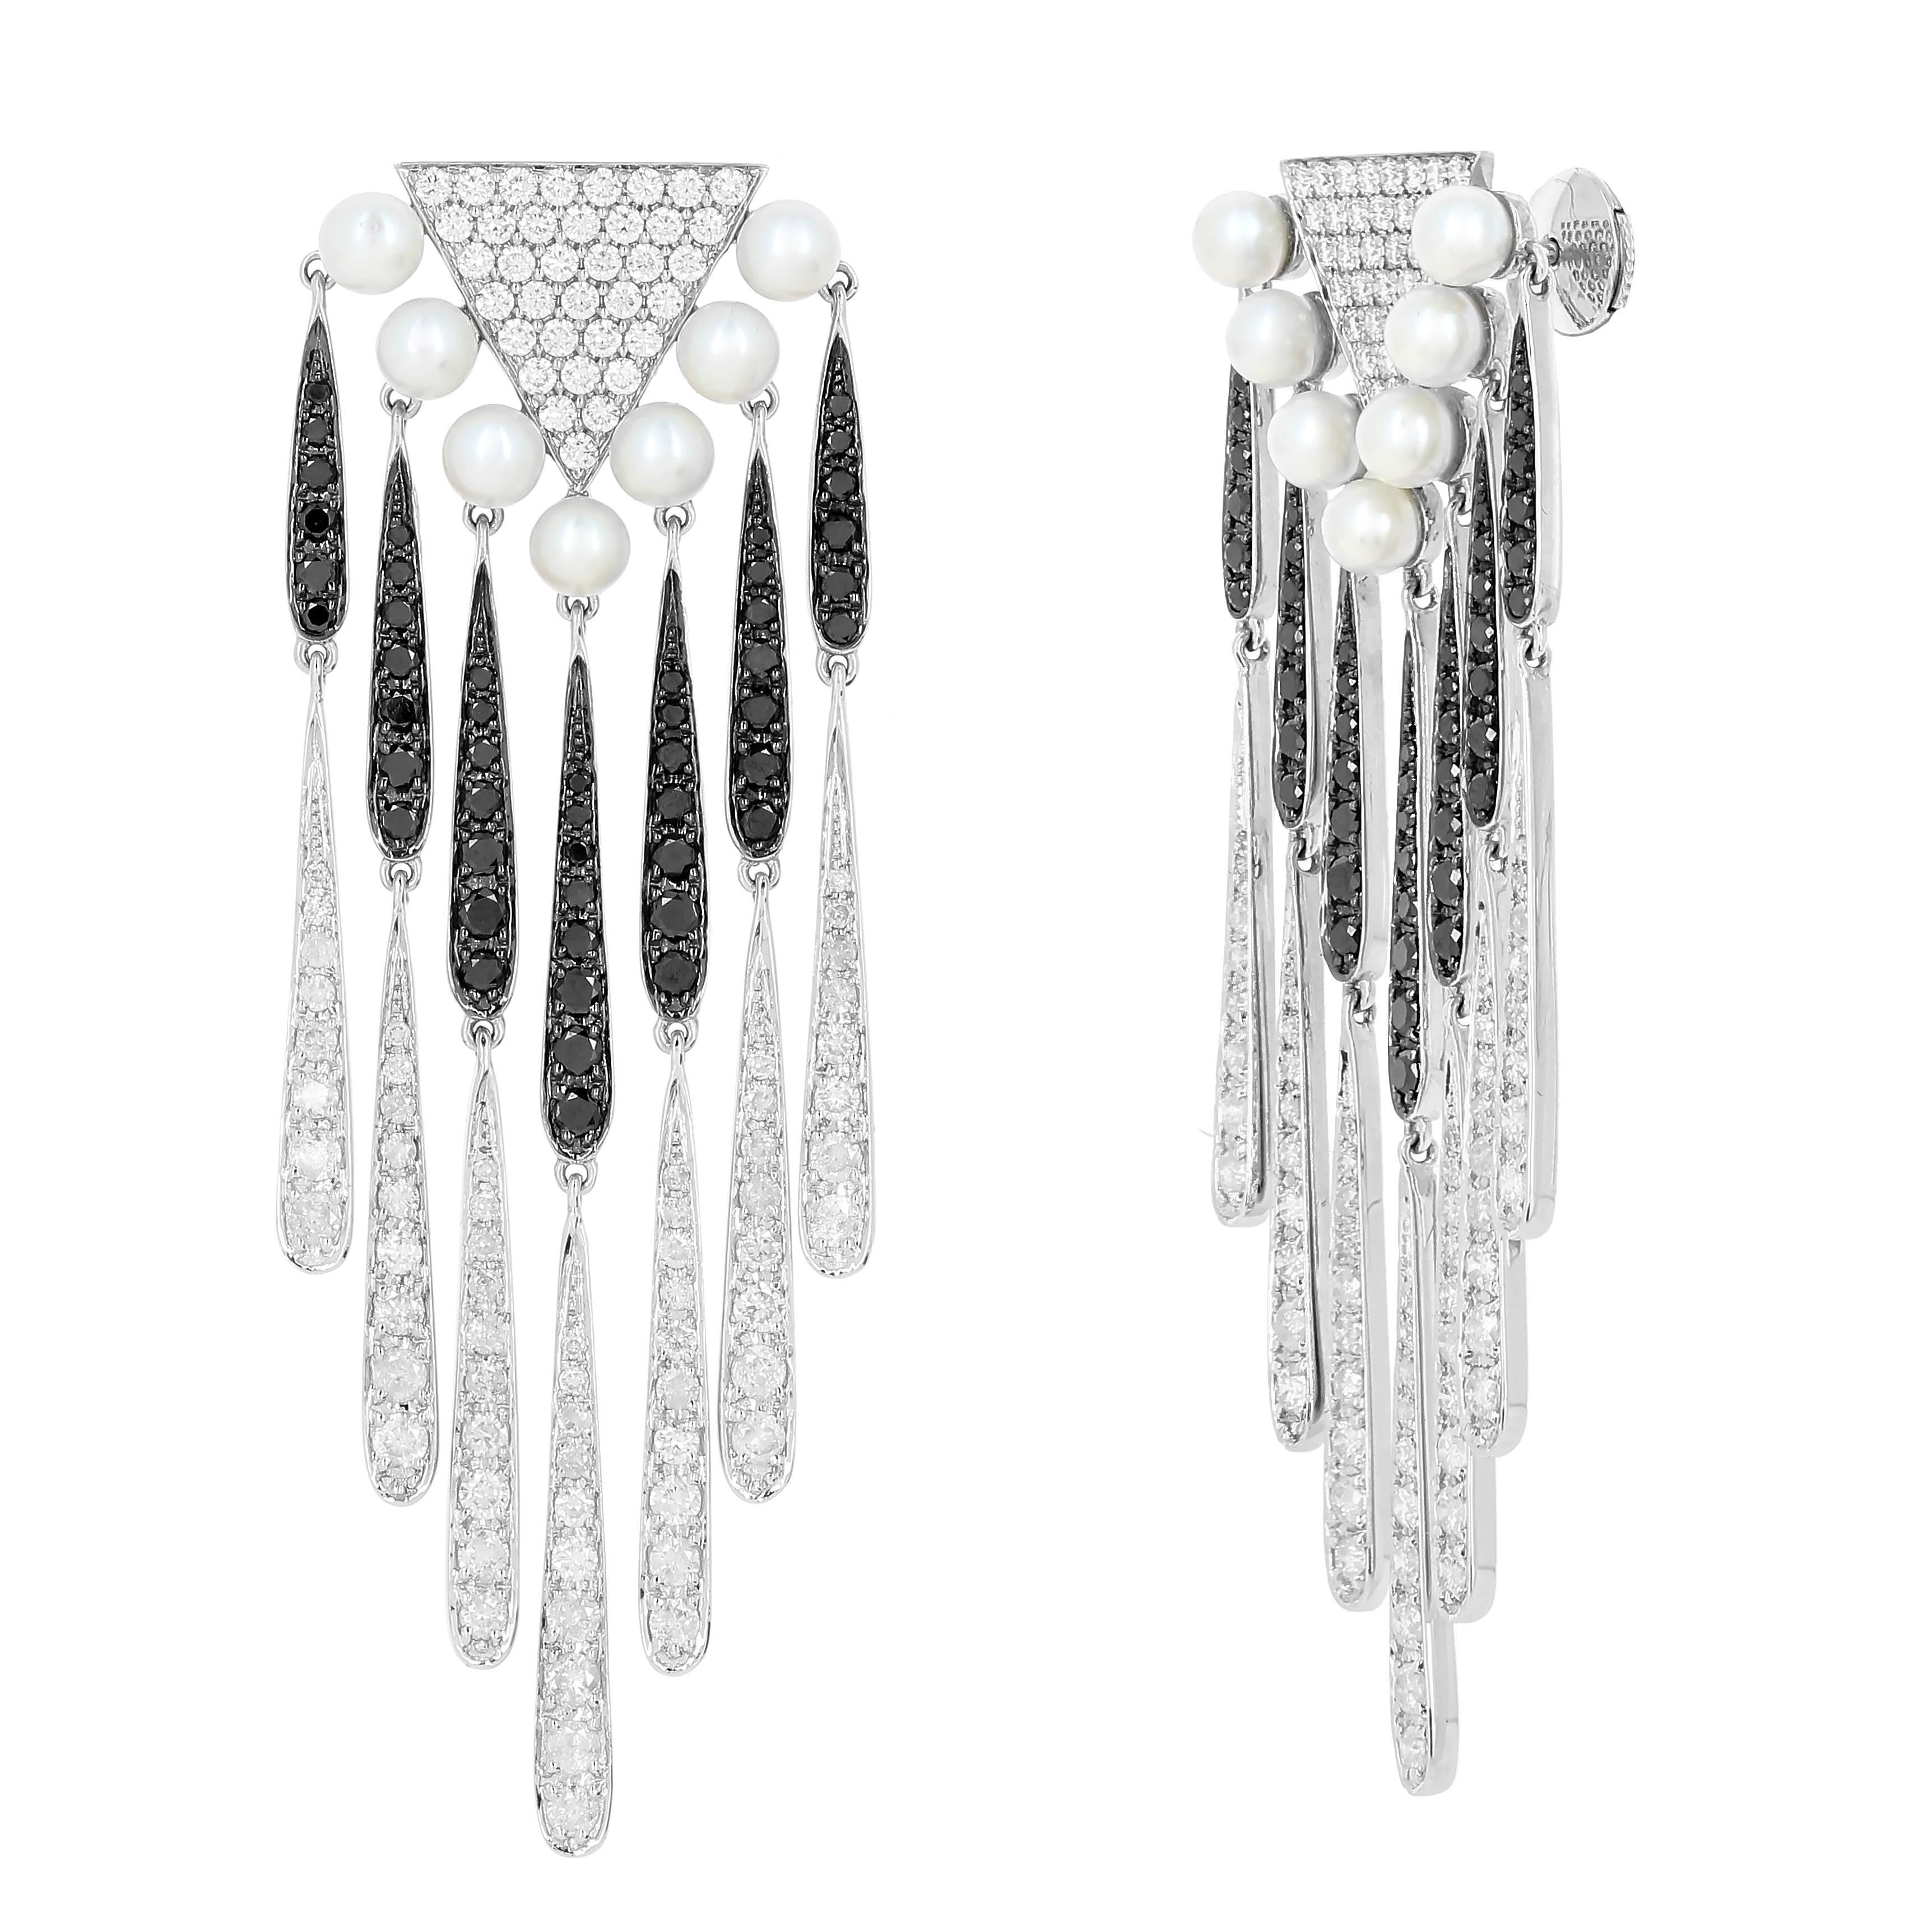 Yvonne Leon's Pair of Earrings in 18K Gold with Diamonds and Black Diamonds  For Sale